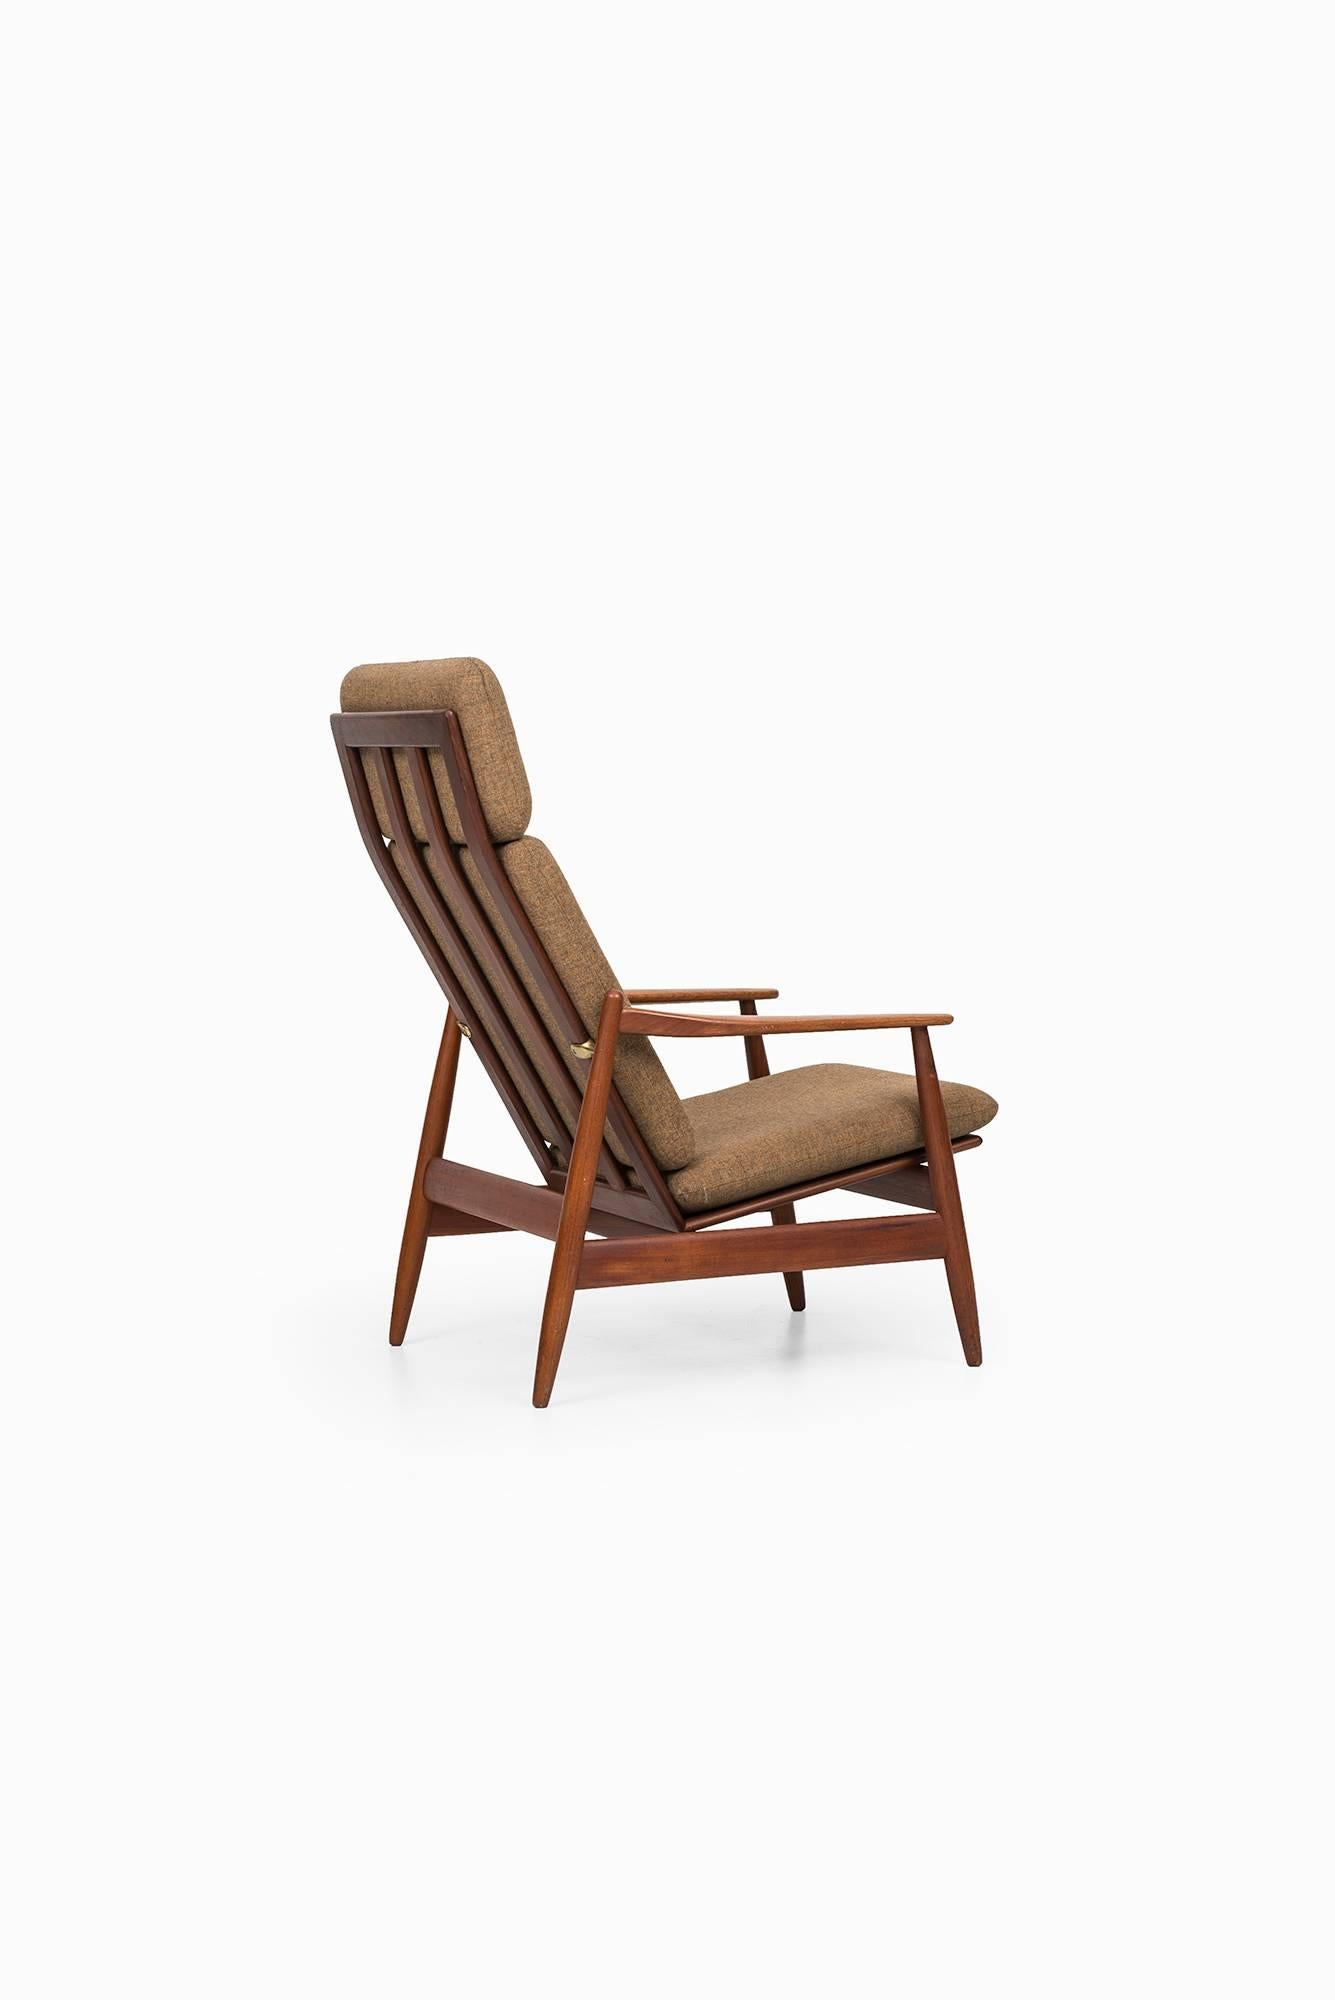 Rare easy chair model 340 designed by Poul Volther. Produced by Frem Røjle in Denmark.